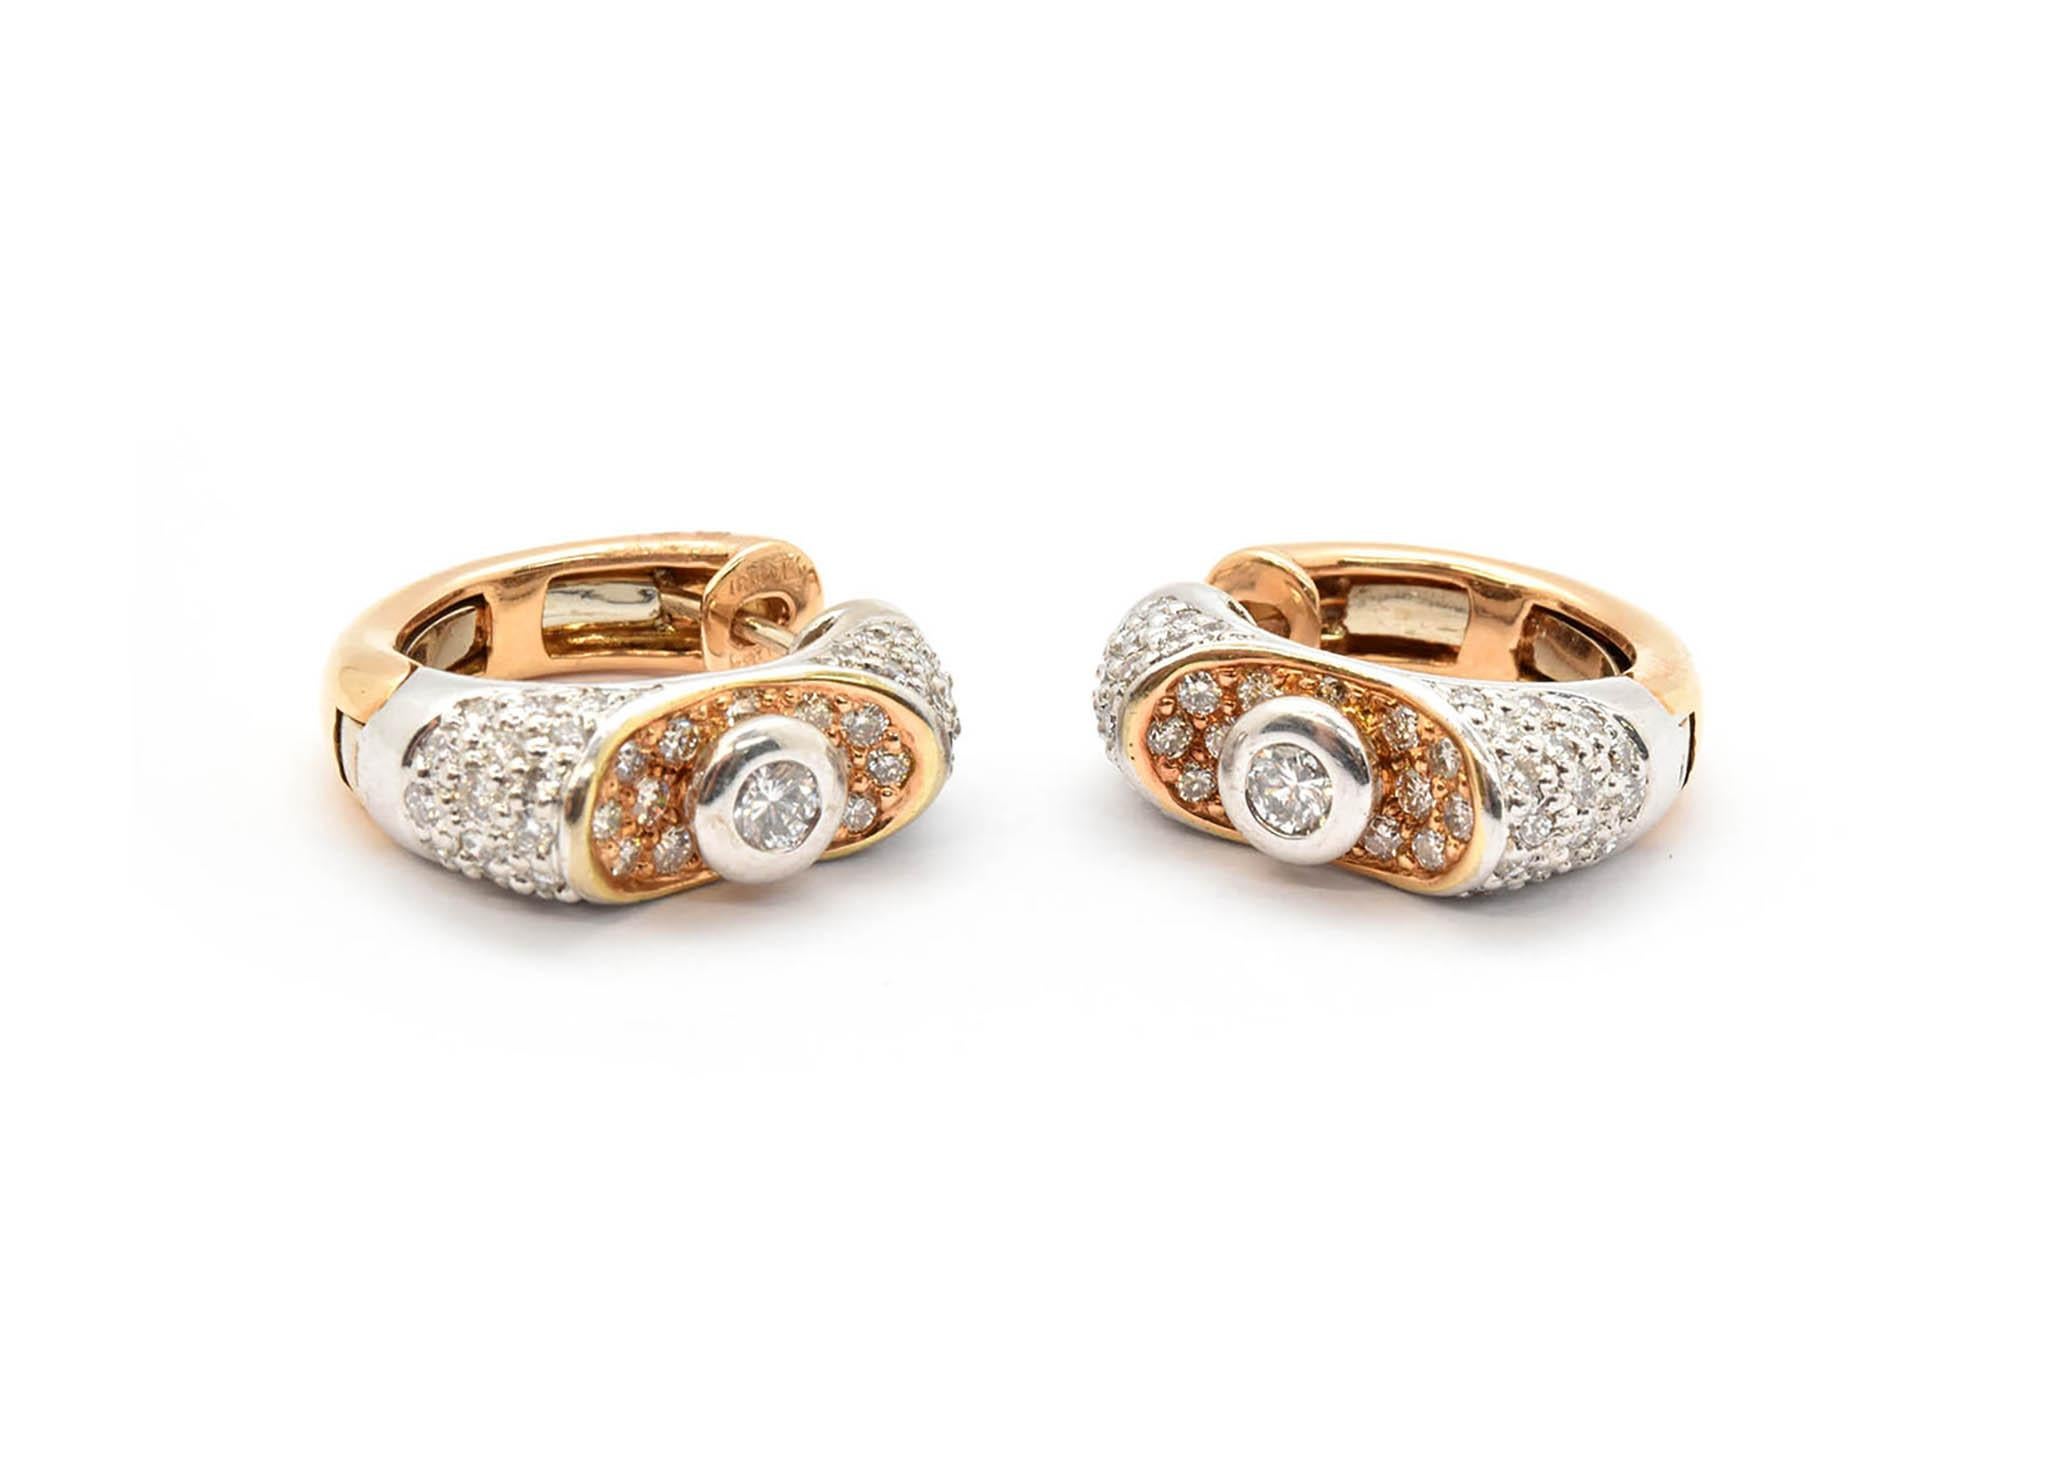 This pair of earrings is made in both 18k white and 18k rose gold, and they are signed 